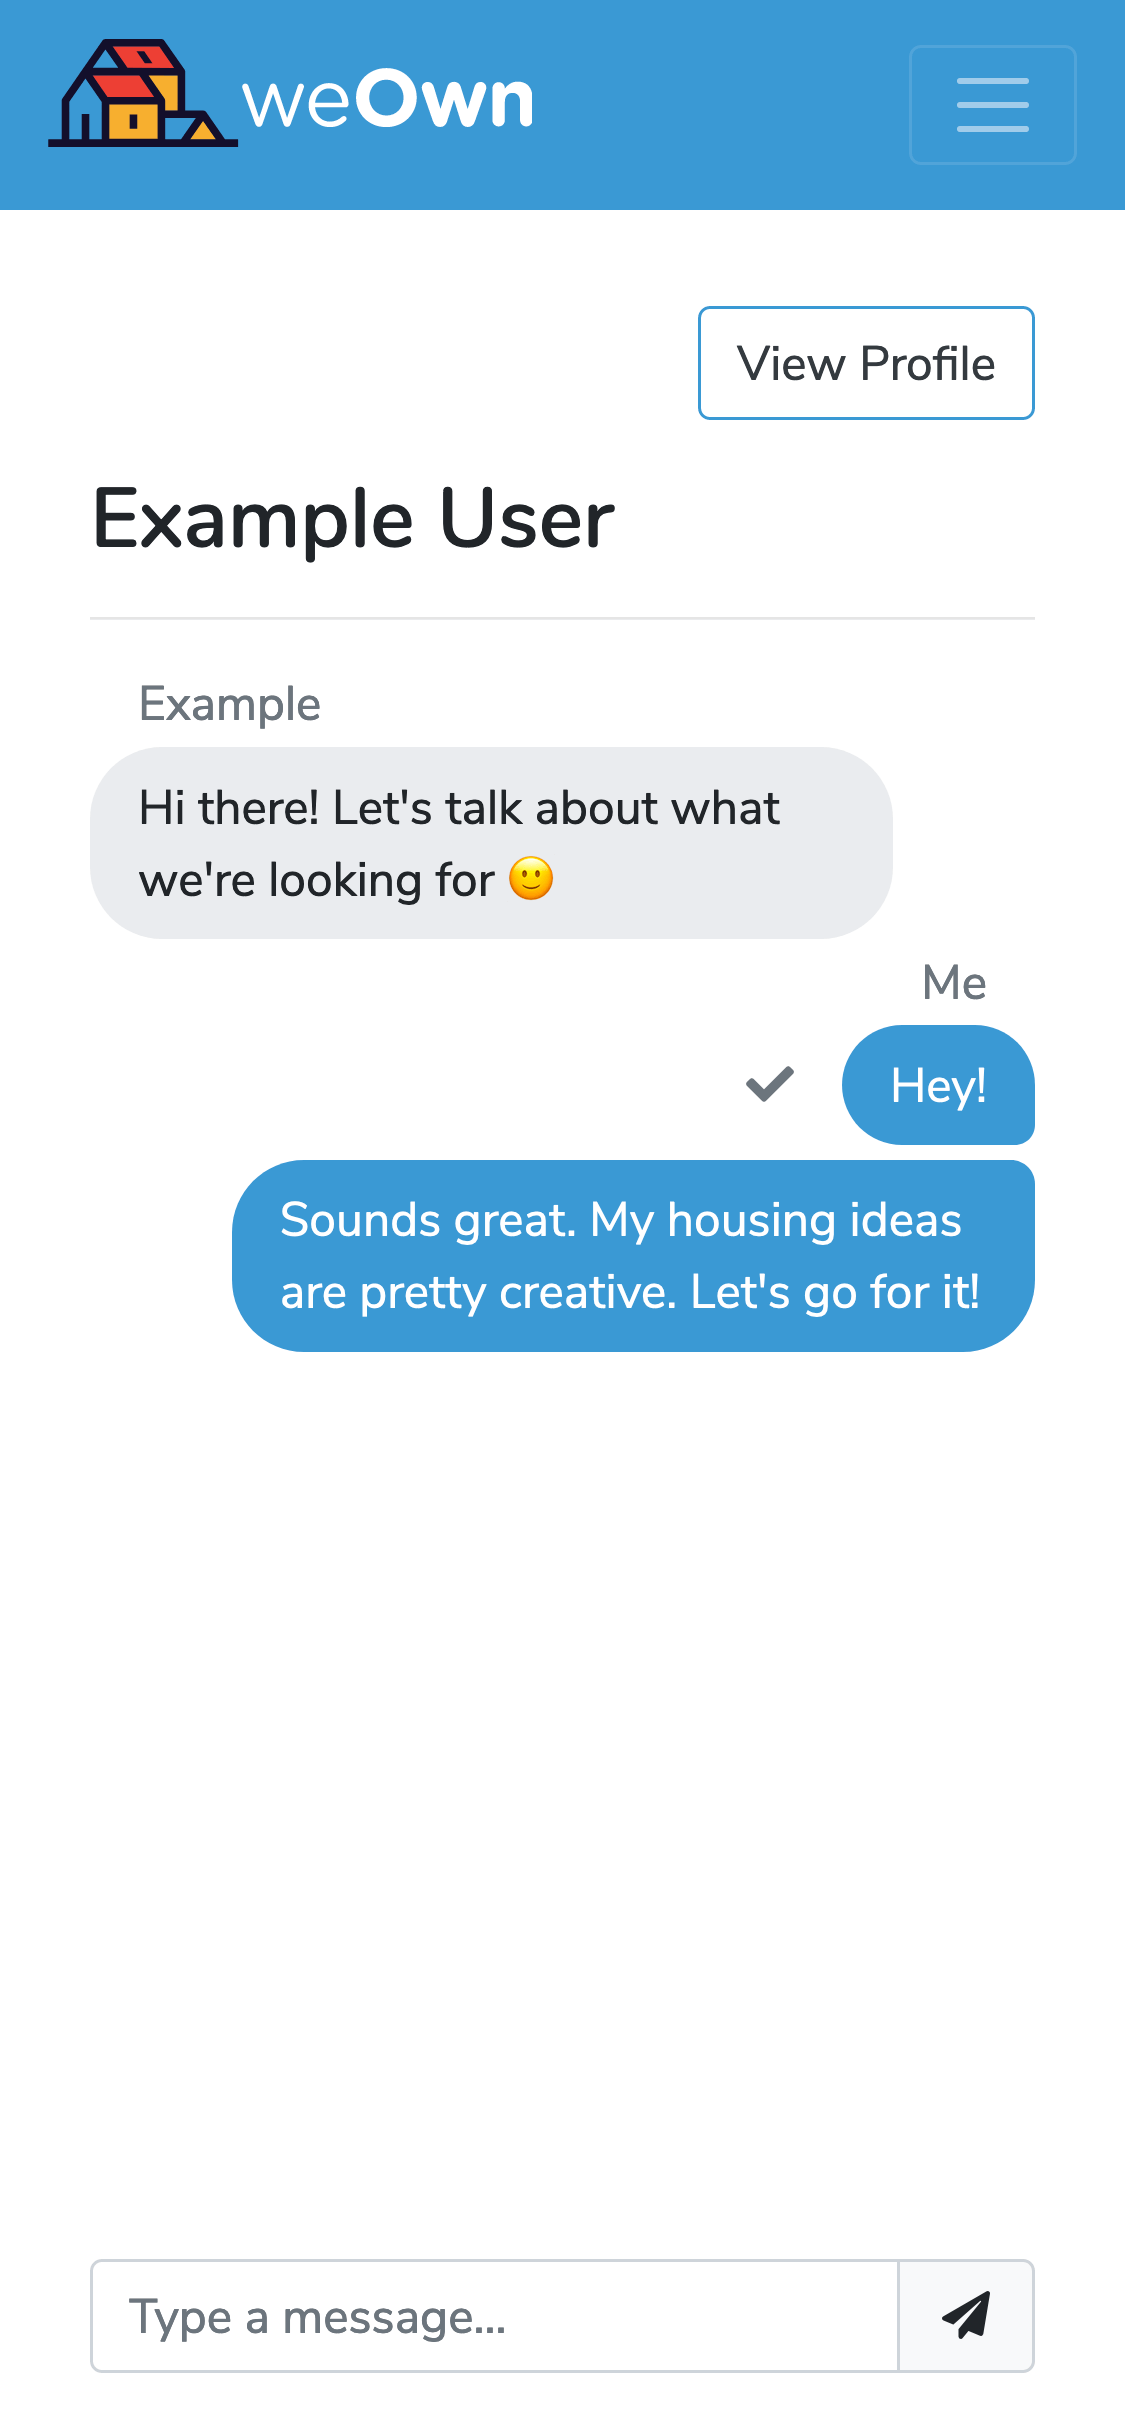 Mobile view of chat between two users discussing housing their goals